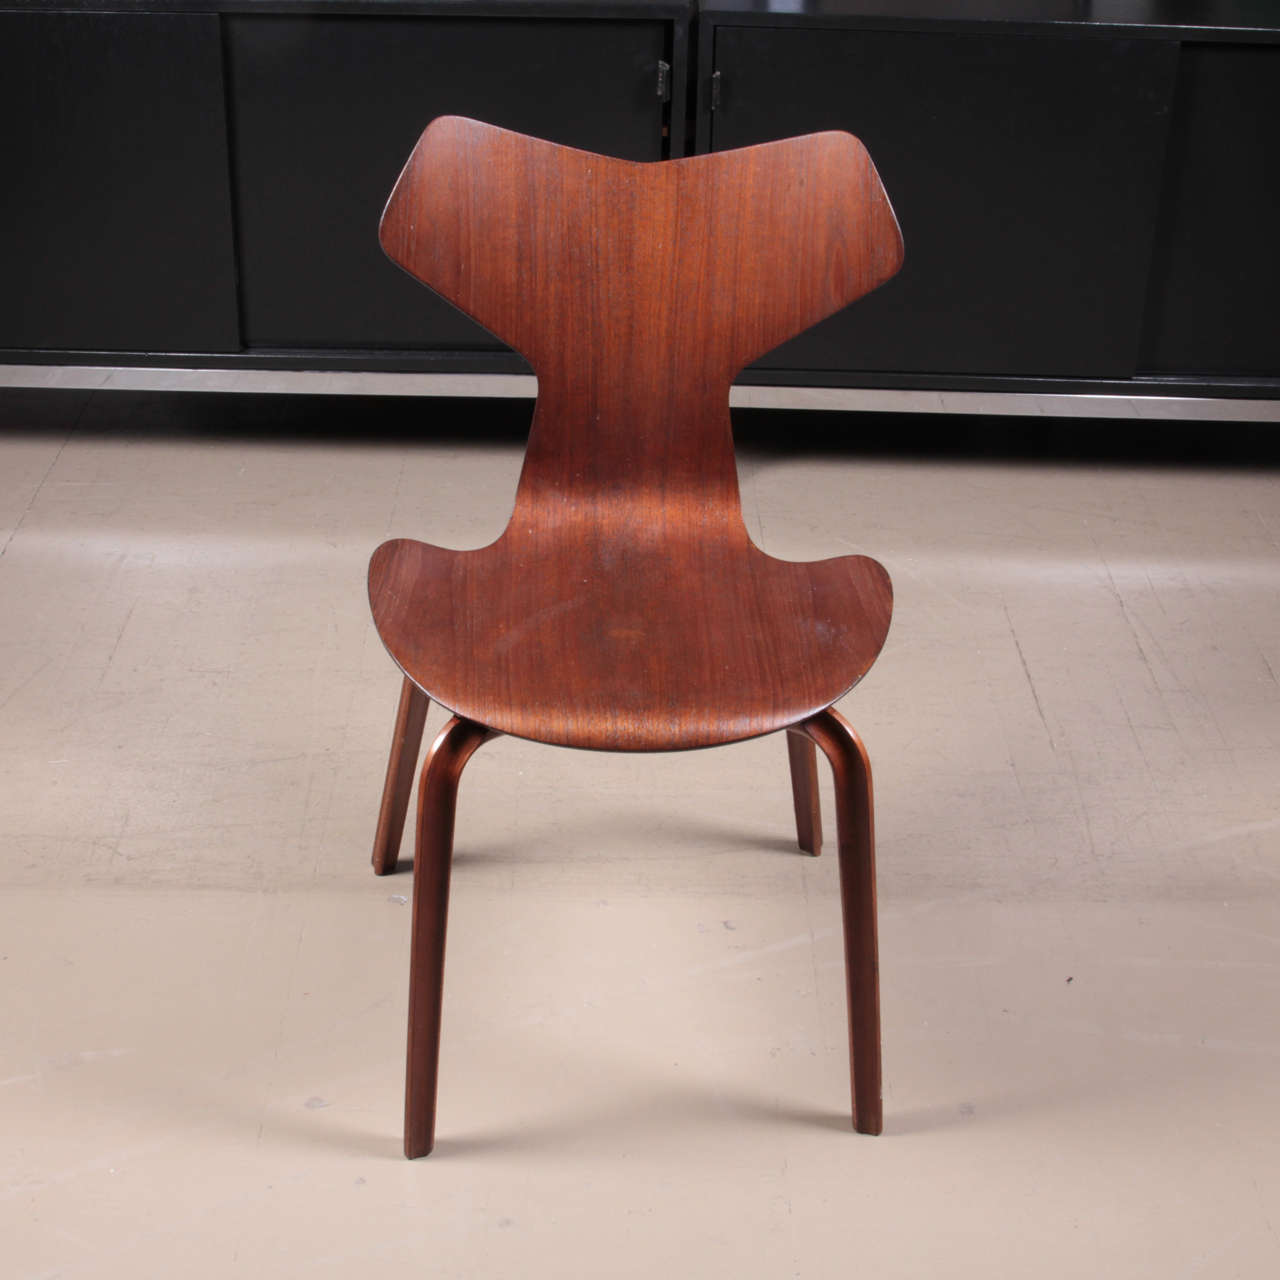 Pair of teak dining chairs designed in 1957 by Arne Jacobsen and subsequently called the “Grand Prix” chairs after winning the prestigious award at the Milan Triennale the same year. Manufactured by Fritz Hansen in Denmark. This version of the chair